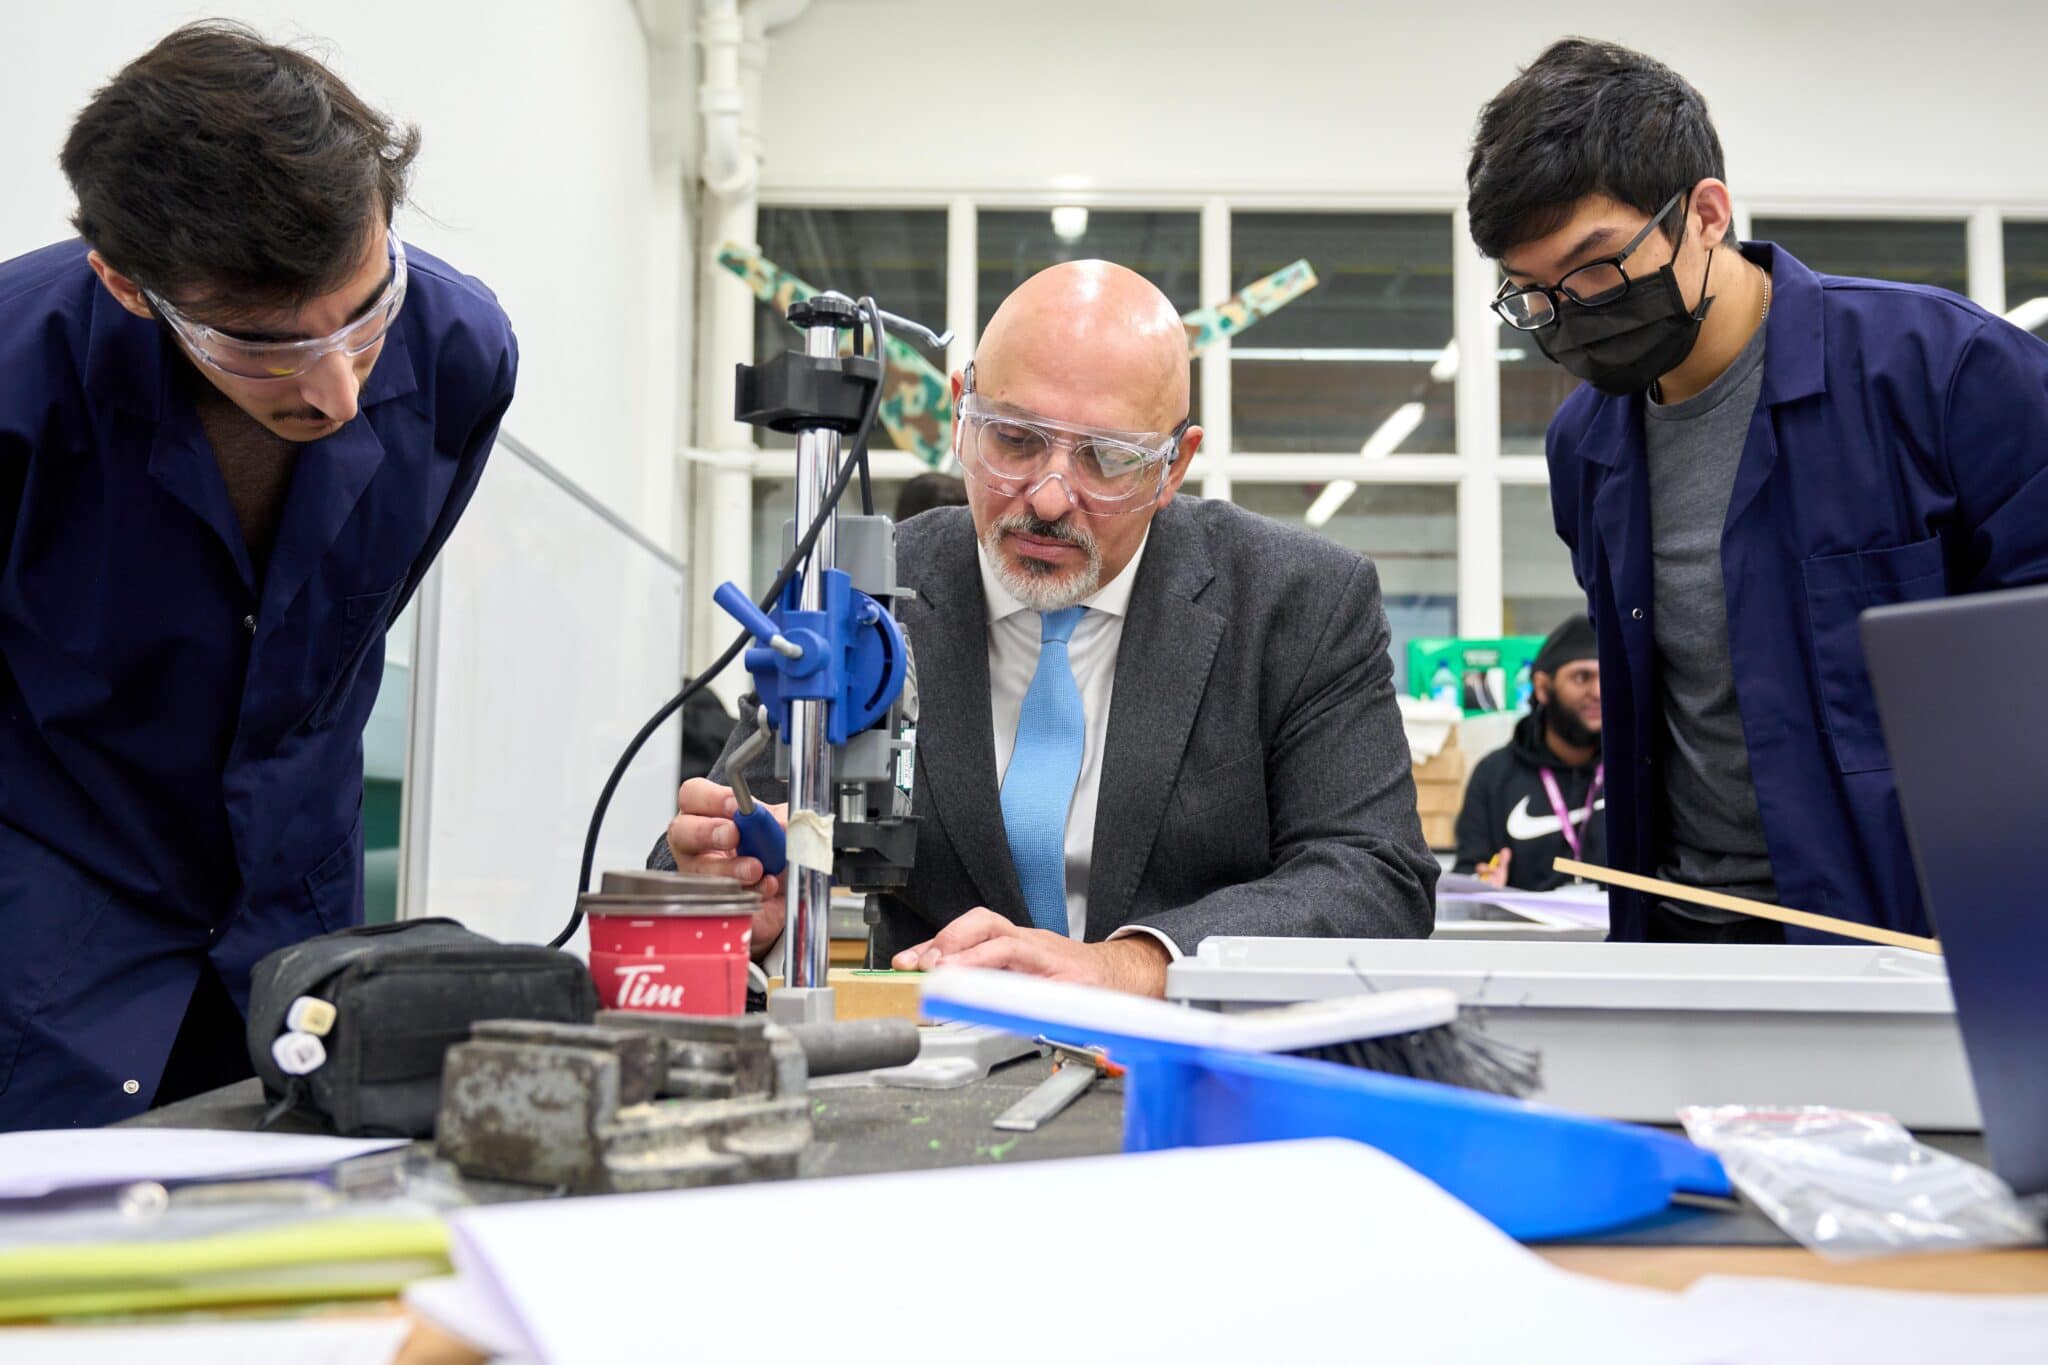 The Rt Hon Nadhim Zahawi MP, the Secretary of State for Education, at the GBSIoT Hub.